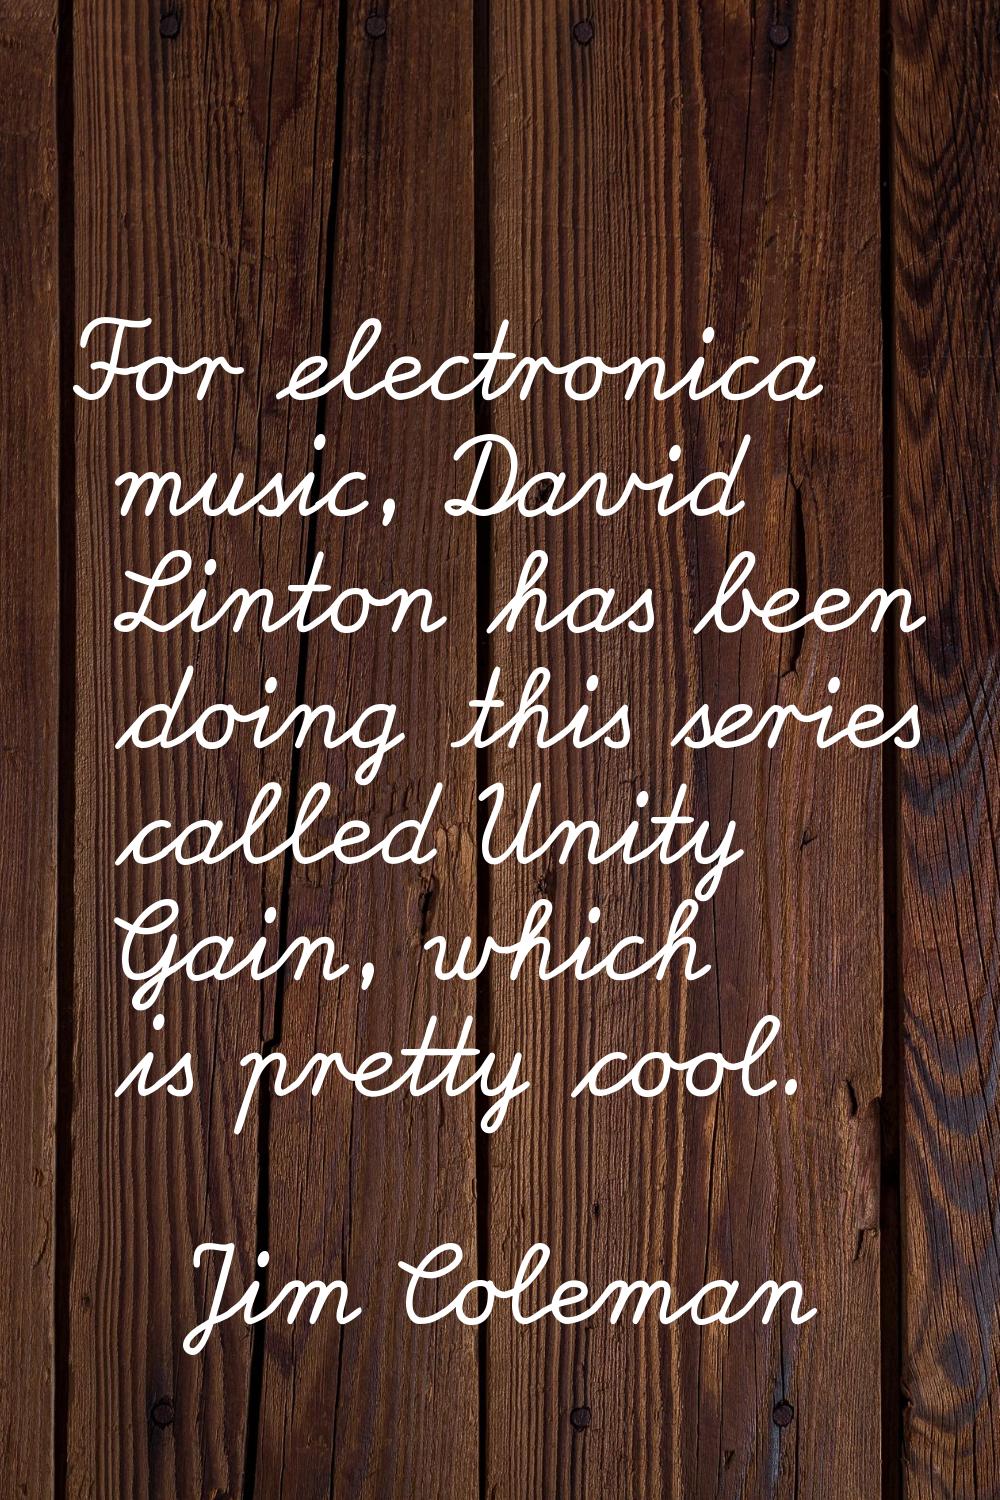 For electronica music, David Linton has been doing this series called Unity Gain, which is pretty c